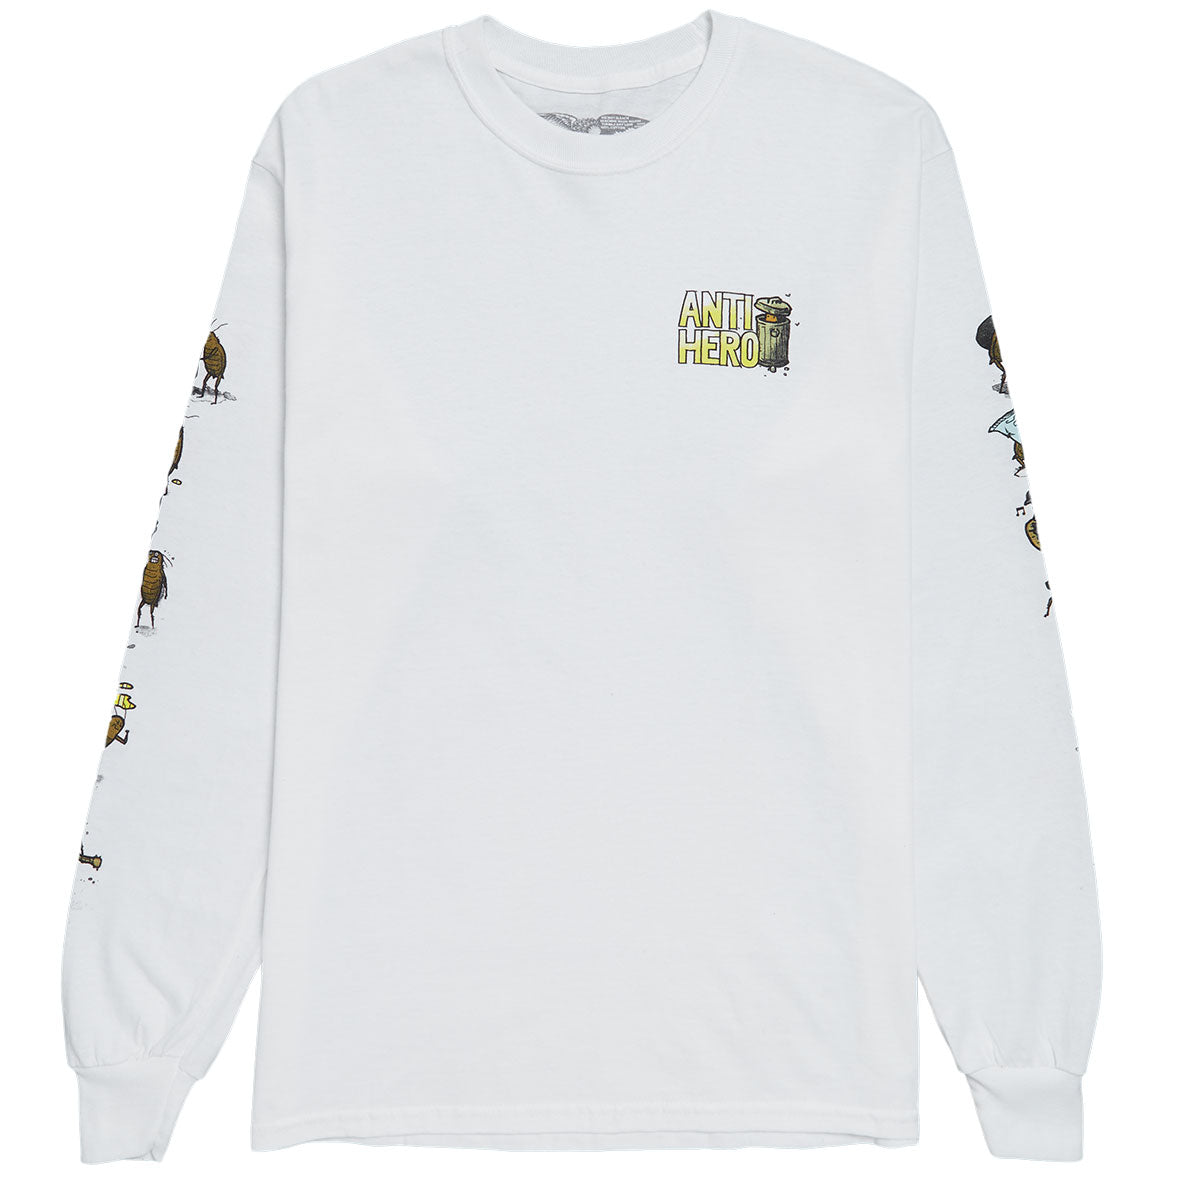 Anti-Hero Roached Out Long Sleeve T-Shirt - White/Multi Color image 1